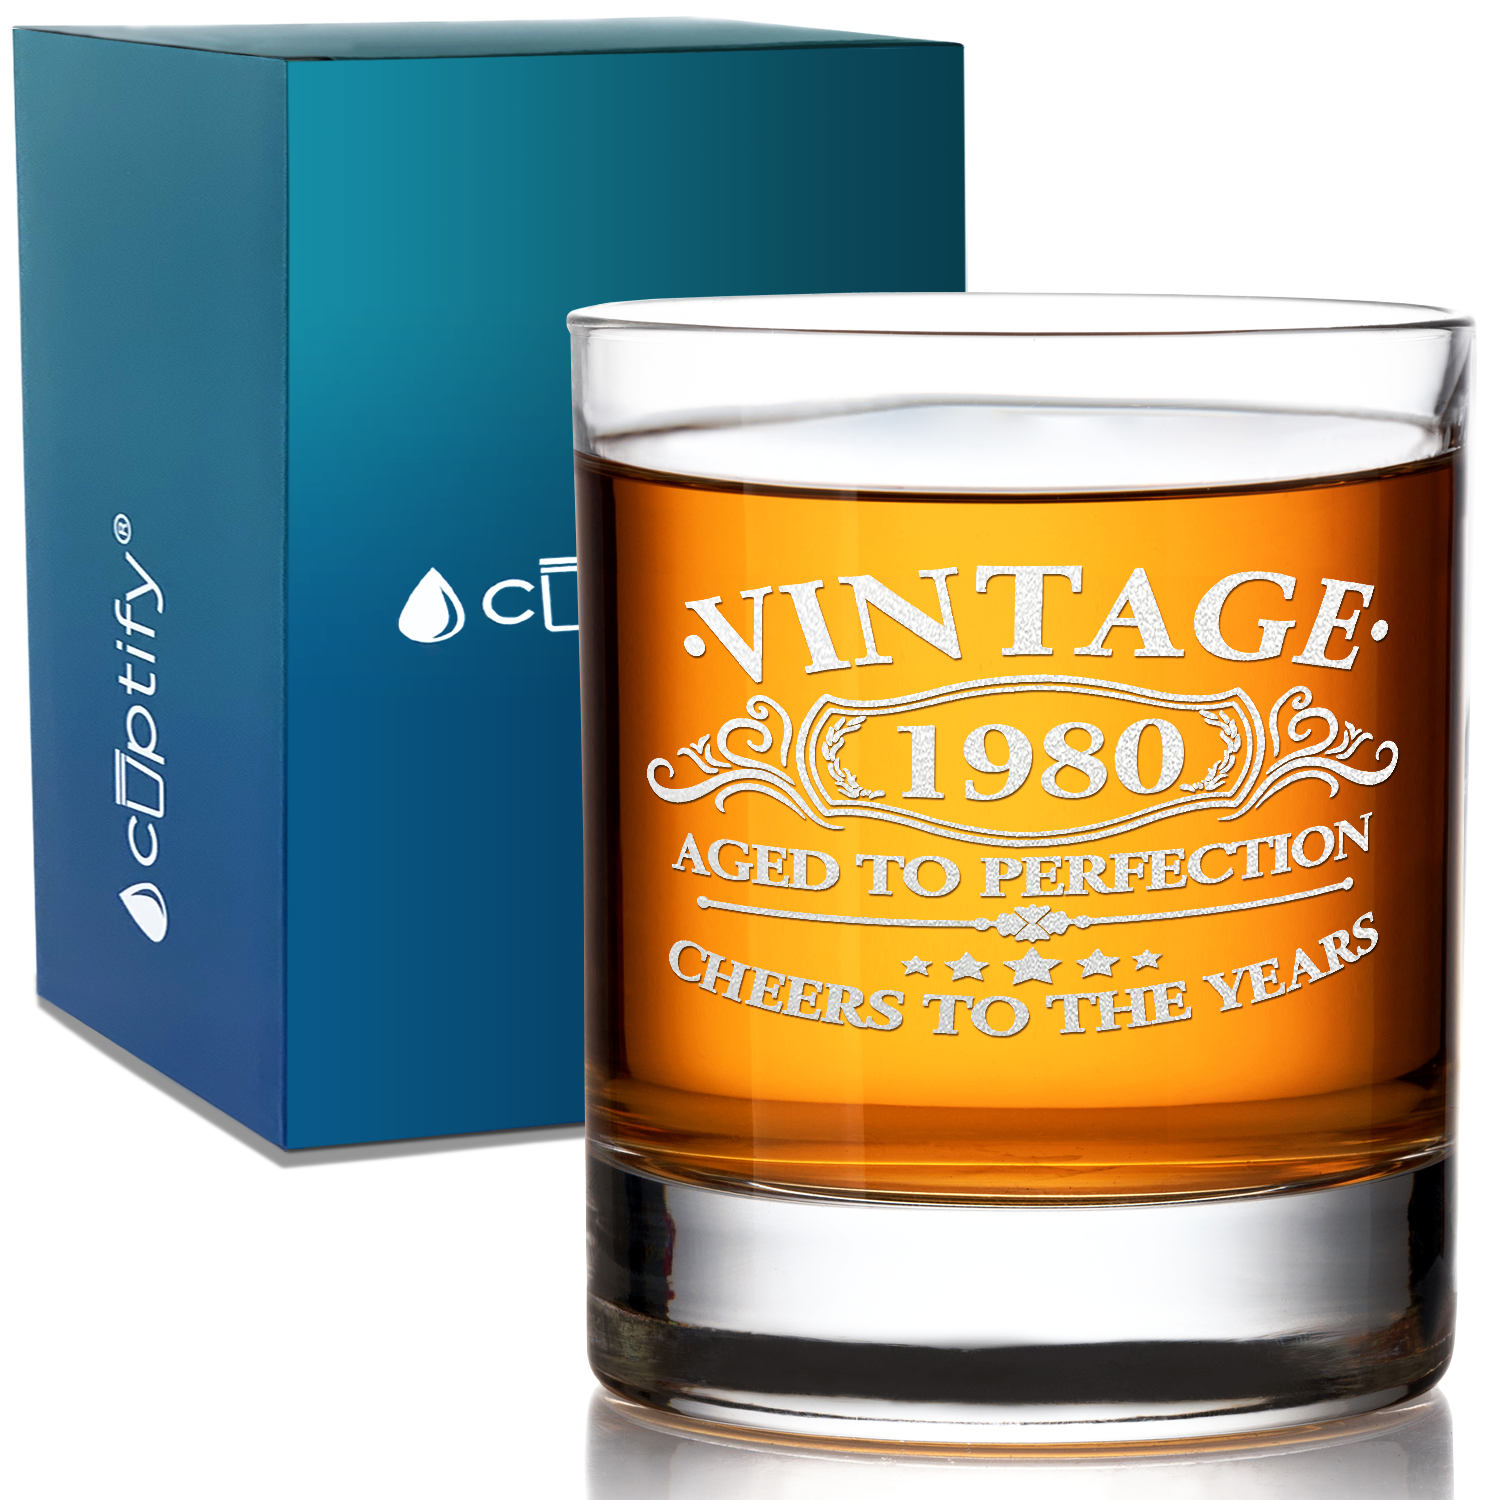 Vintage Aged To Perfection Cheers To 41 Years 1980 Laser Engraved on 10.25oz Old Fashion Glass